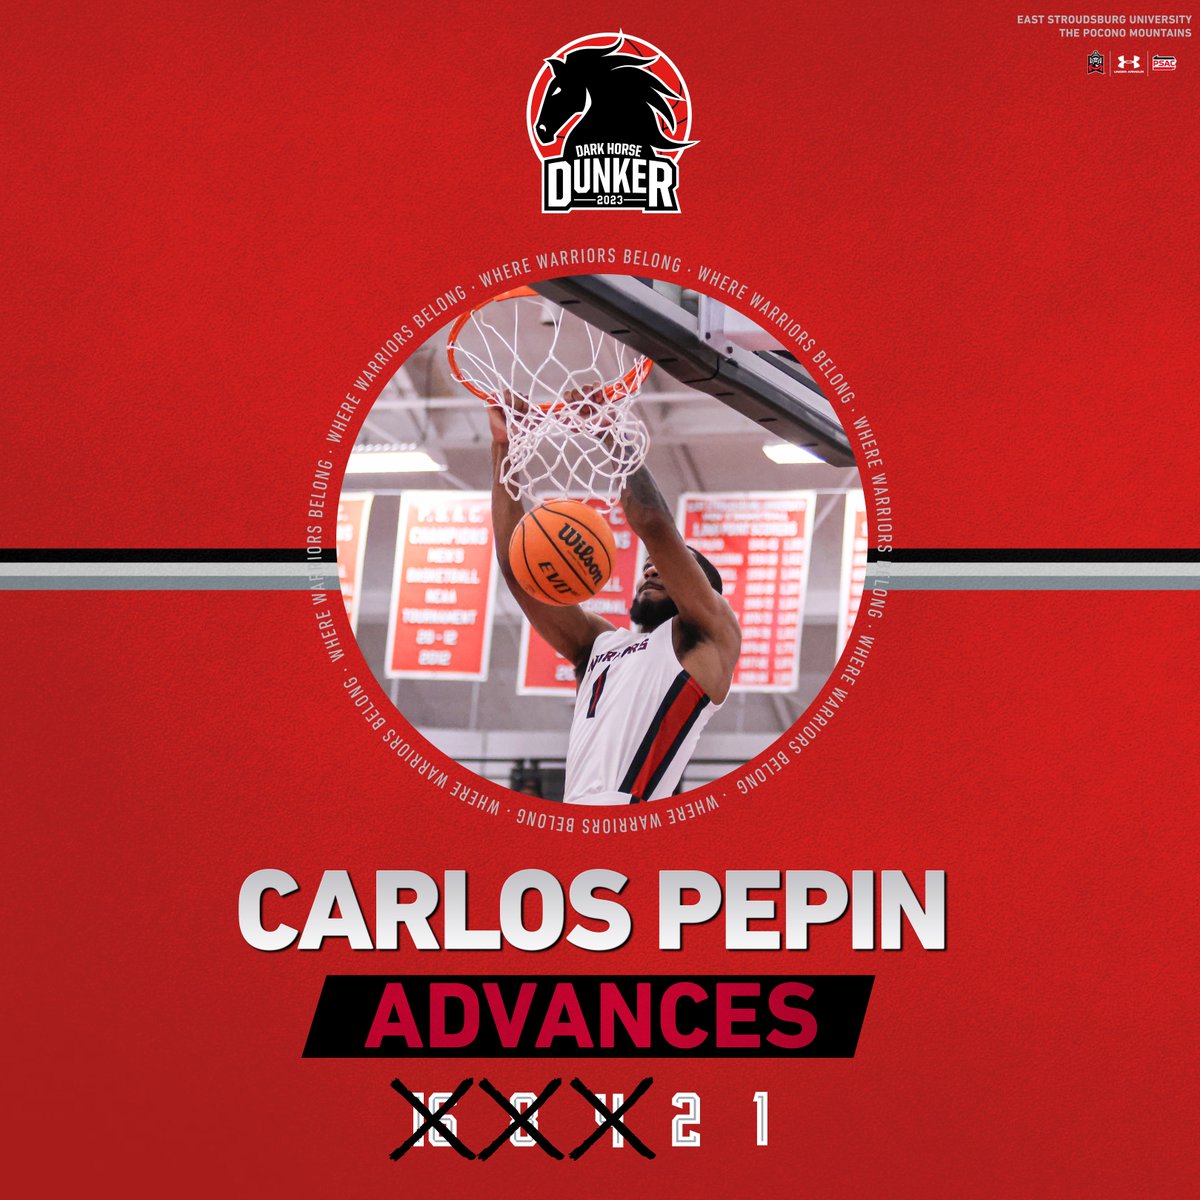 𝗗𝗔𝗥𝗞 𝗛𝗢𝗥𝗦𝗘 𝗗𝗨𝗡𝗞𝗘𝗥 𝗙𝗜𝗡𝗔𝗟𝗦 @ESUMBB's Carlos Pepin is a finalist to go to Houston for the King's Hawaiian College Slam Dunk Championship! Vote for 'Los! ⬇️ #WhereWarriorsBelong